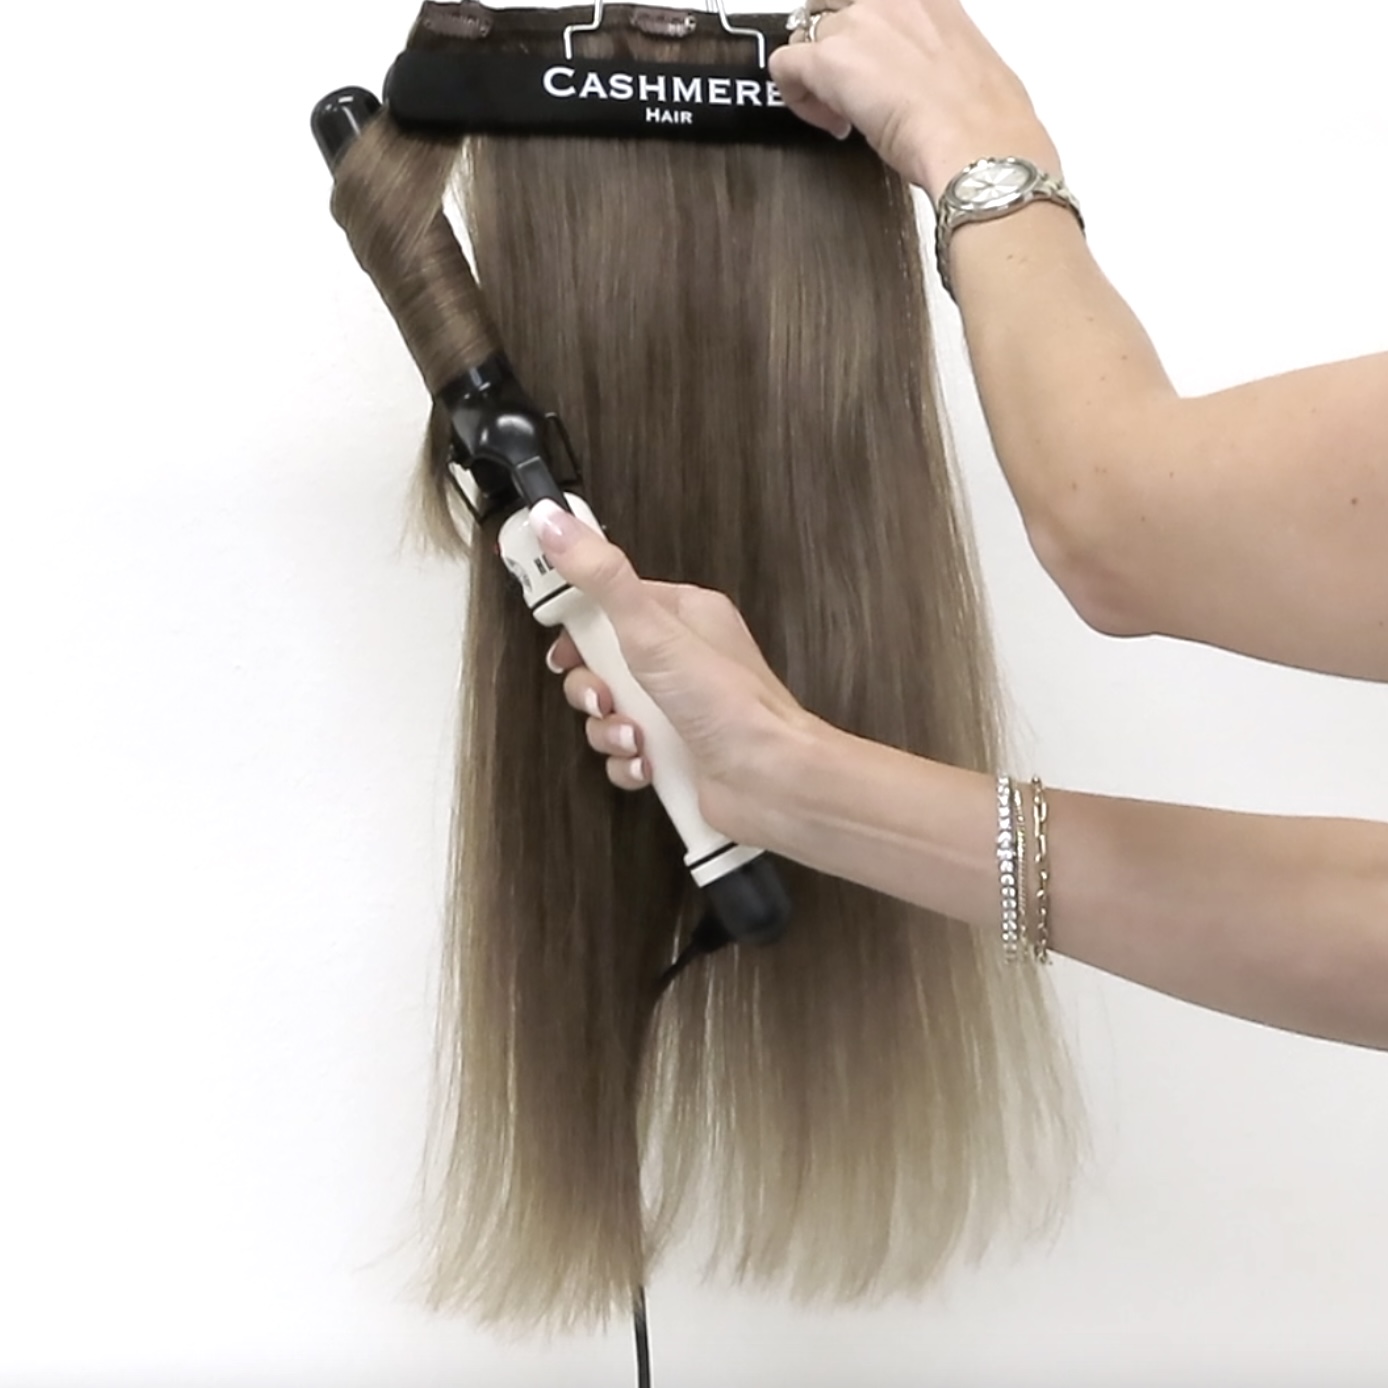 curling cashmere hair extensions with clamp curling iron